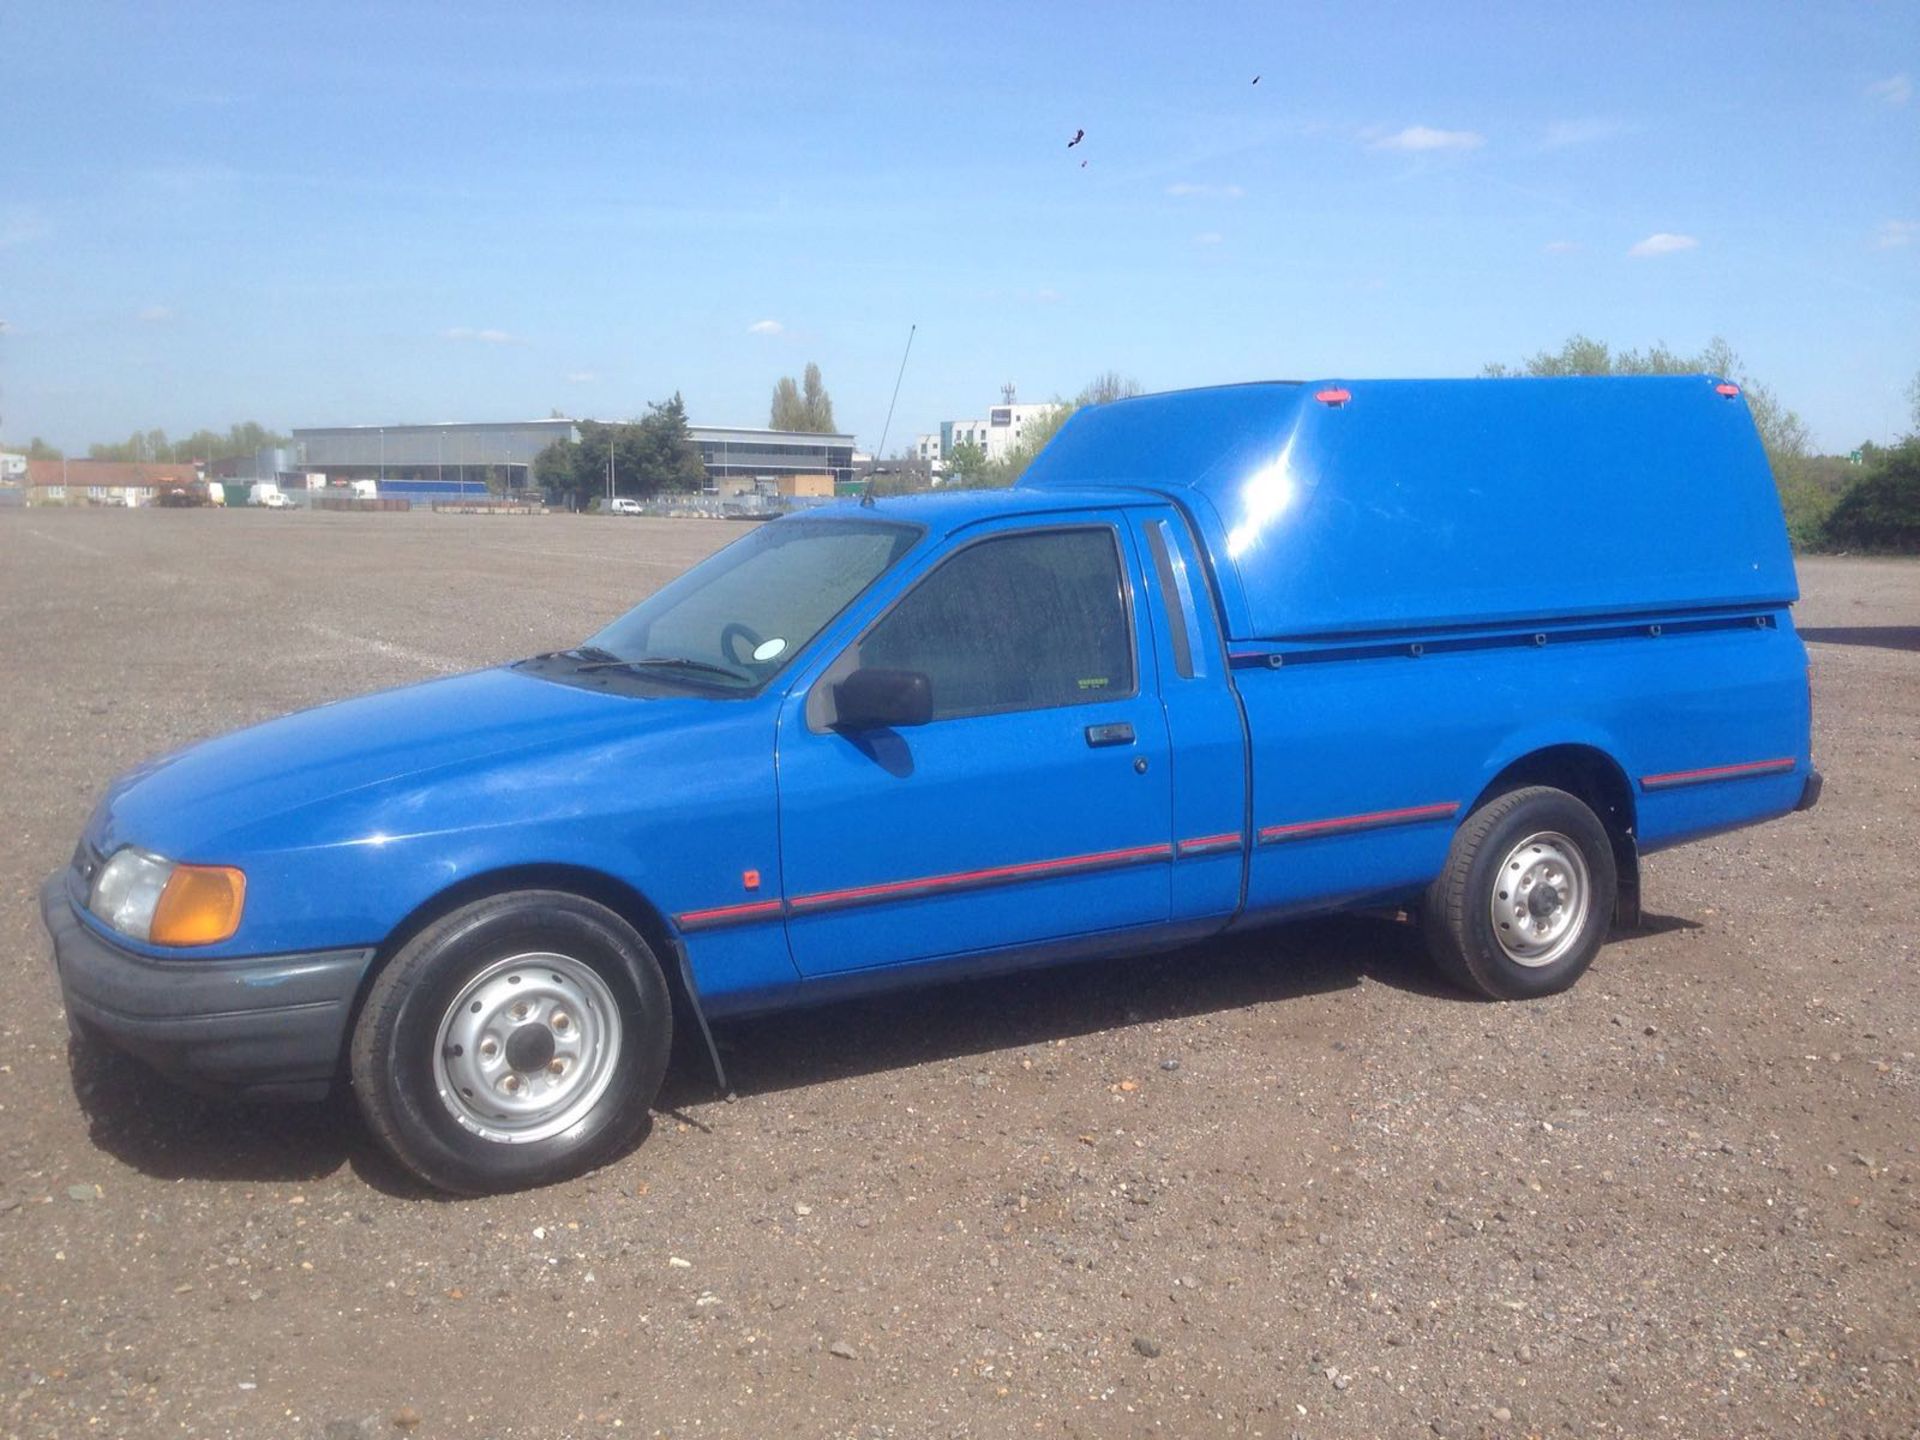 Ford P100 pickup, 1.8 turbo diesel 1991/J 39,000 miles with truckman top 2 owners